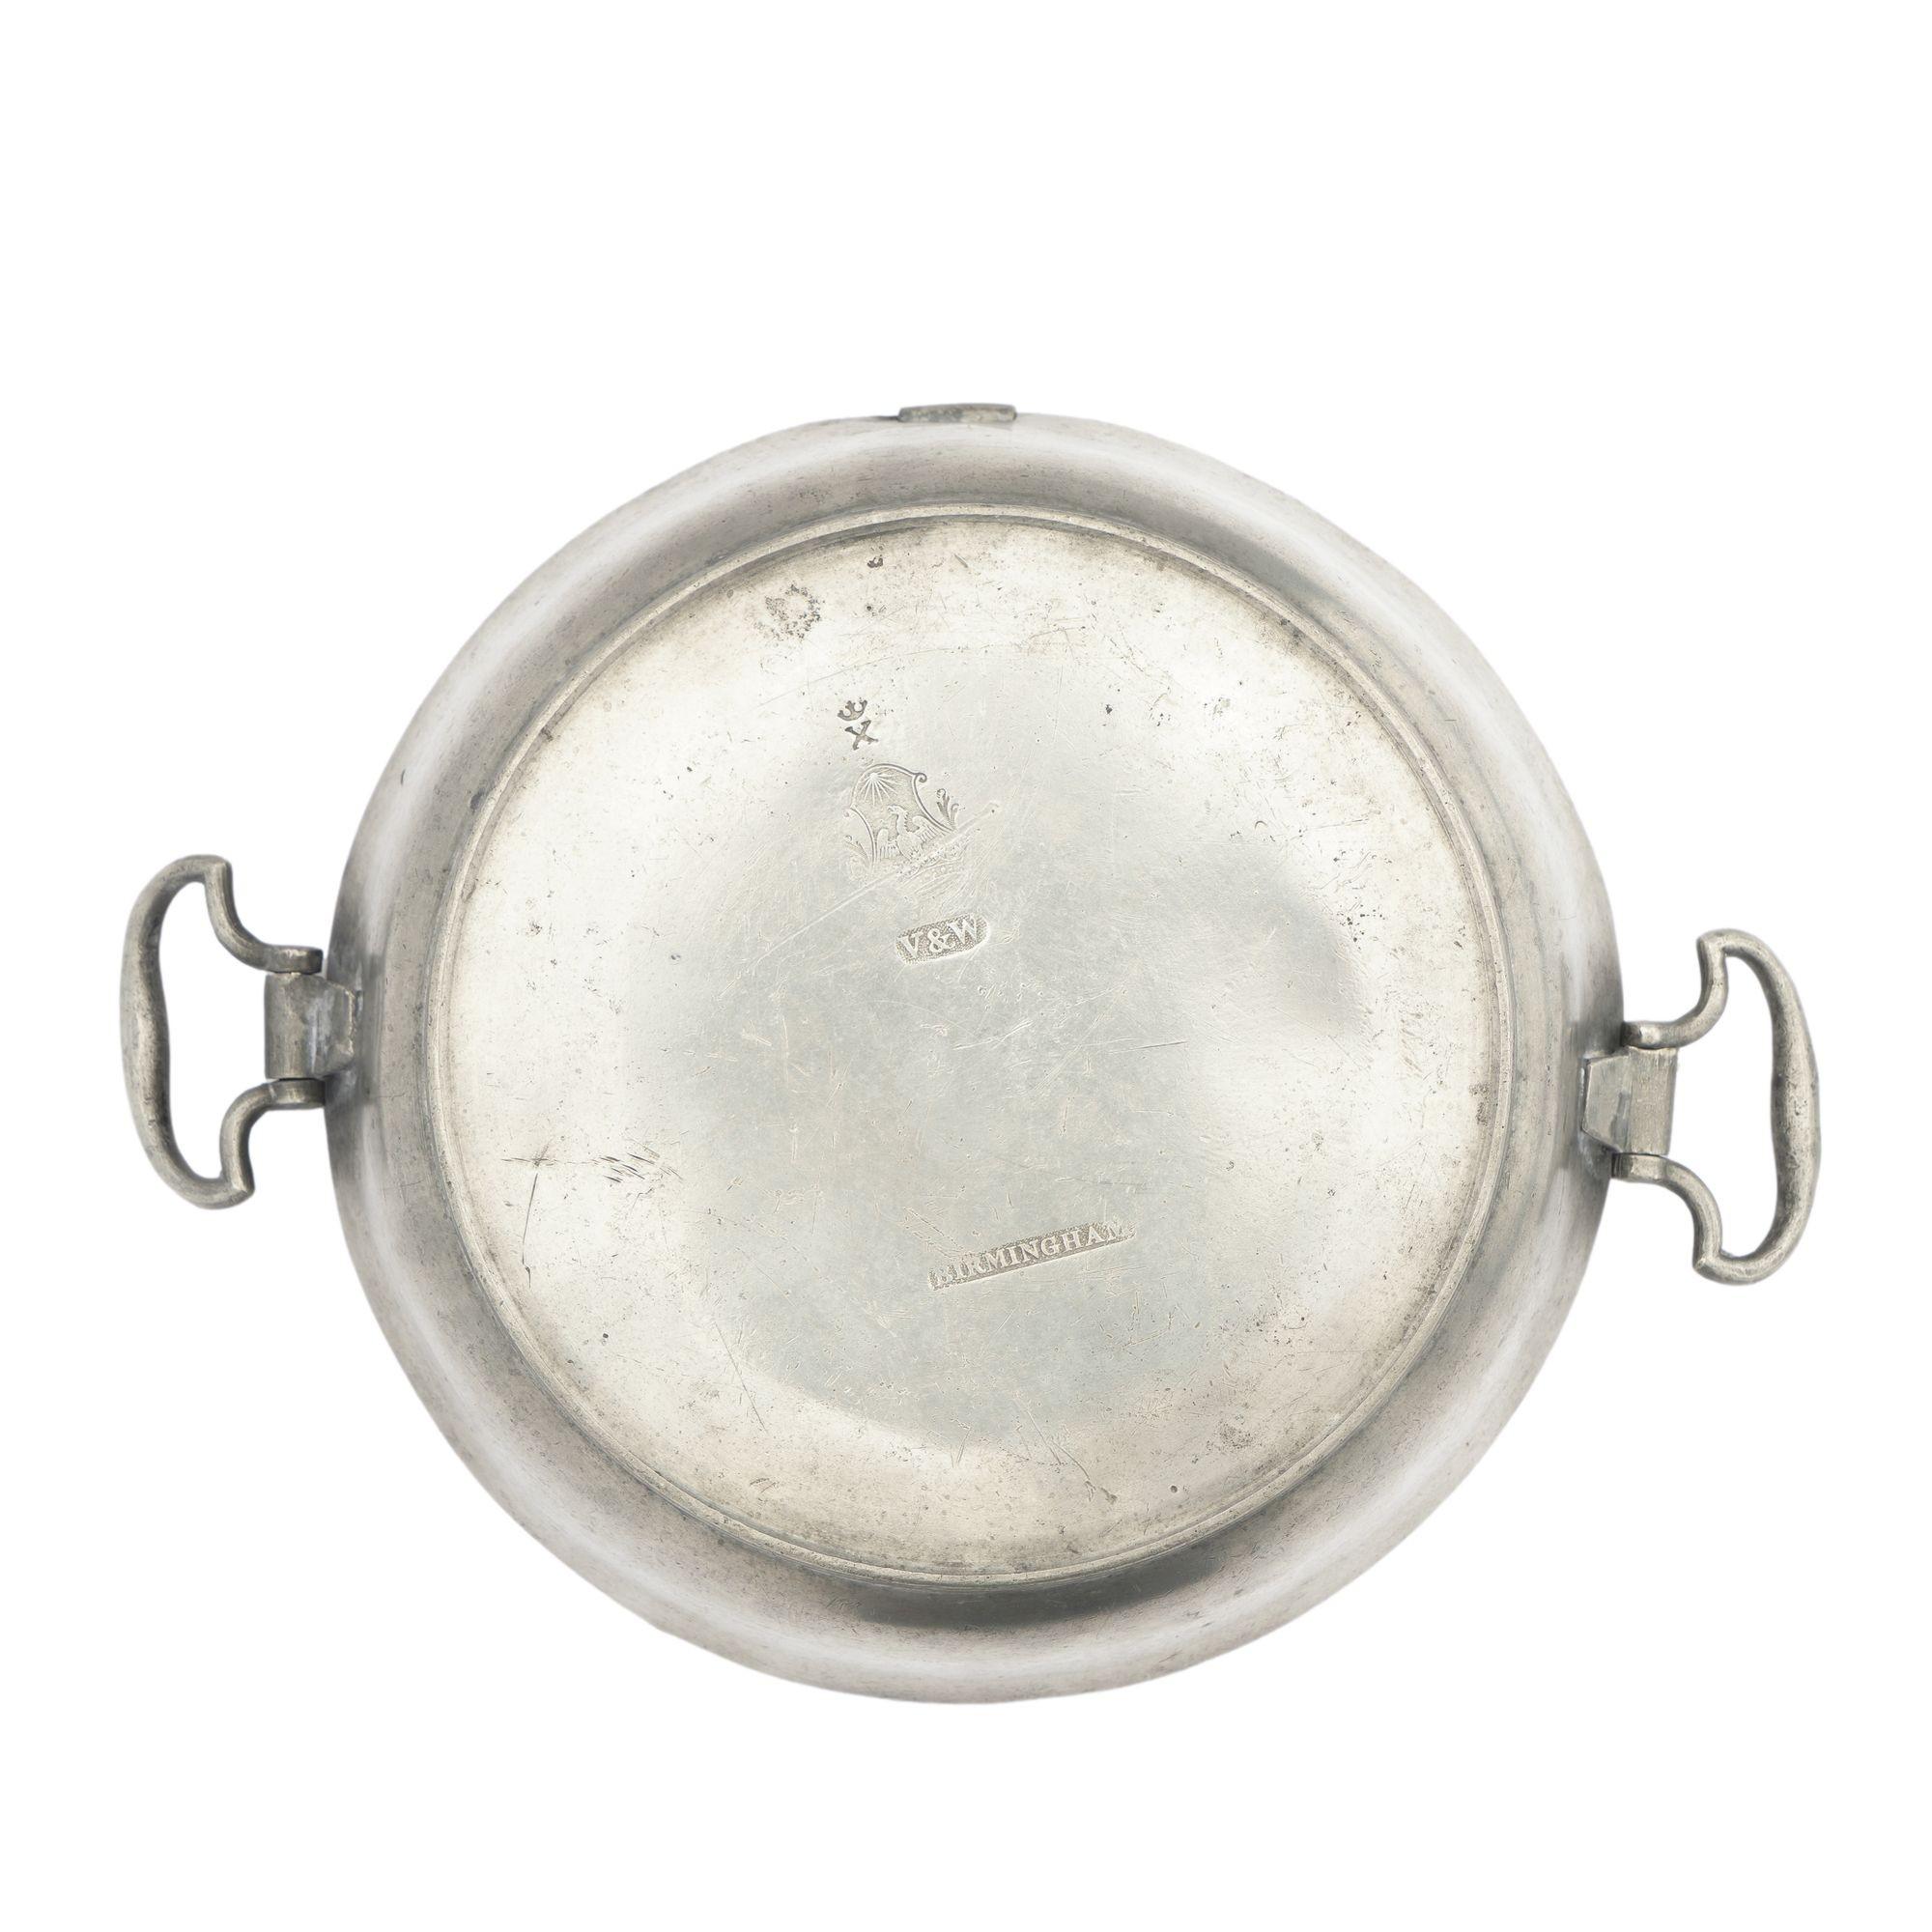 19th Century English pewter warming plate with drop handles by V&W Birmingham, 1808-1827 For Sale